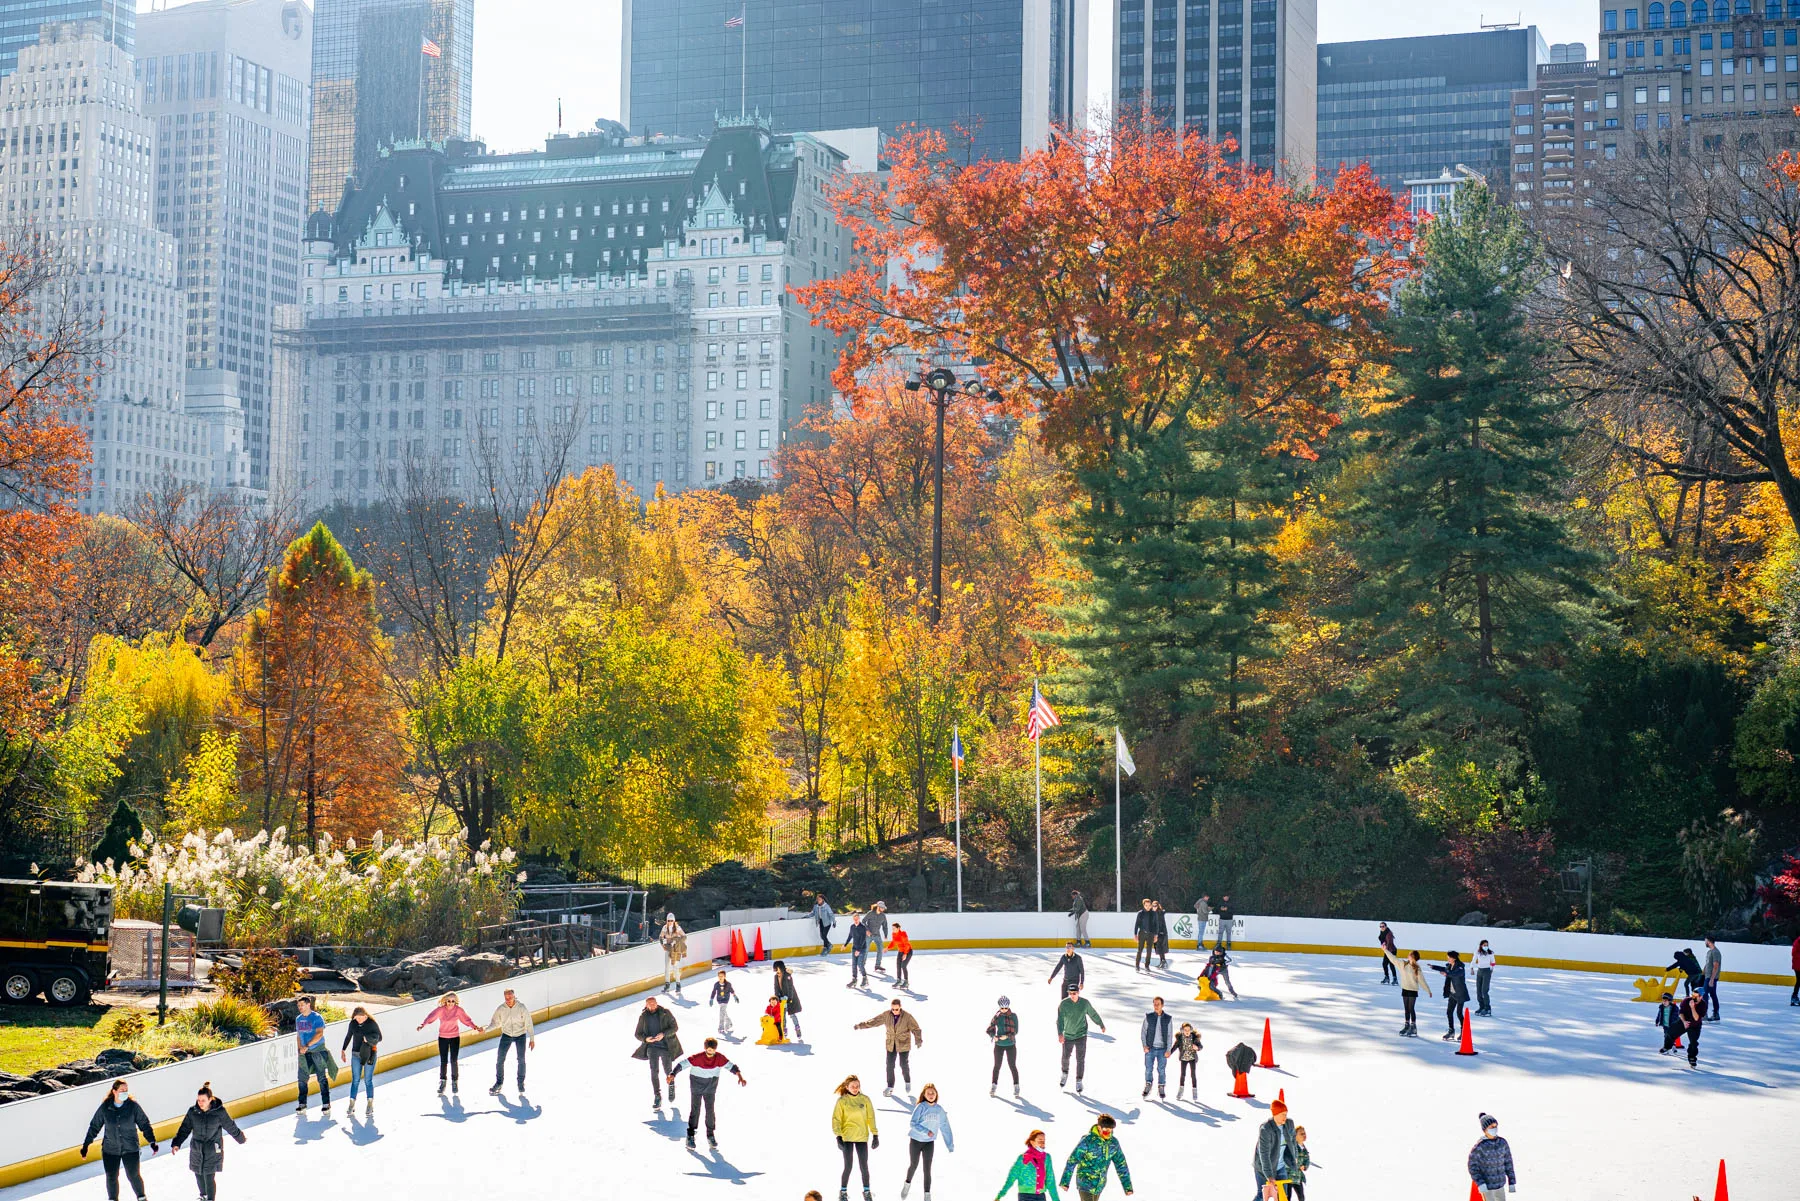 Ice skating in Central Park at Wollman Rink